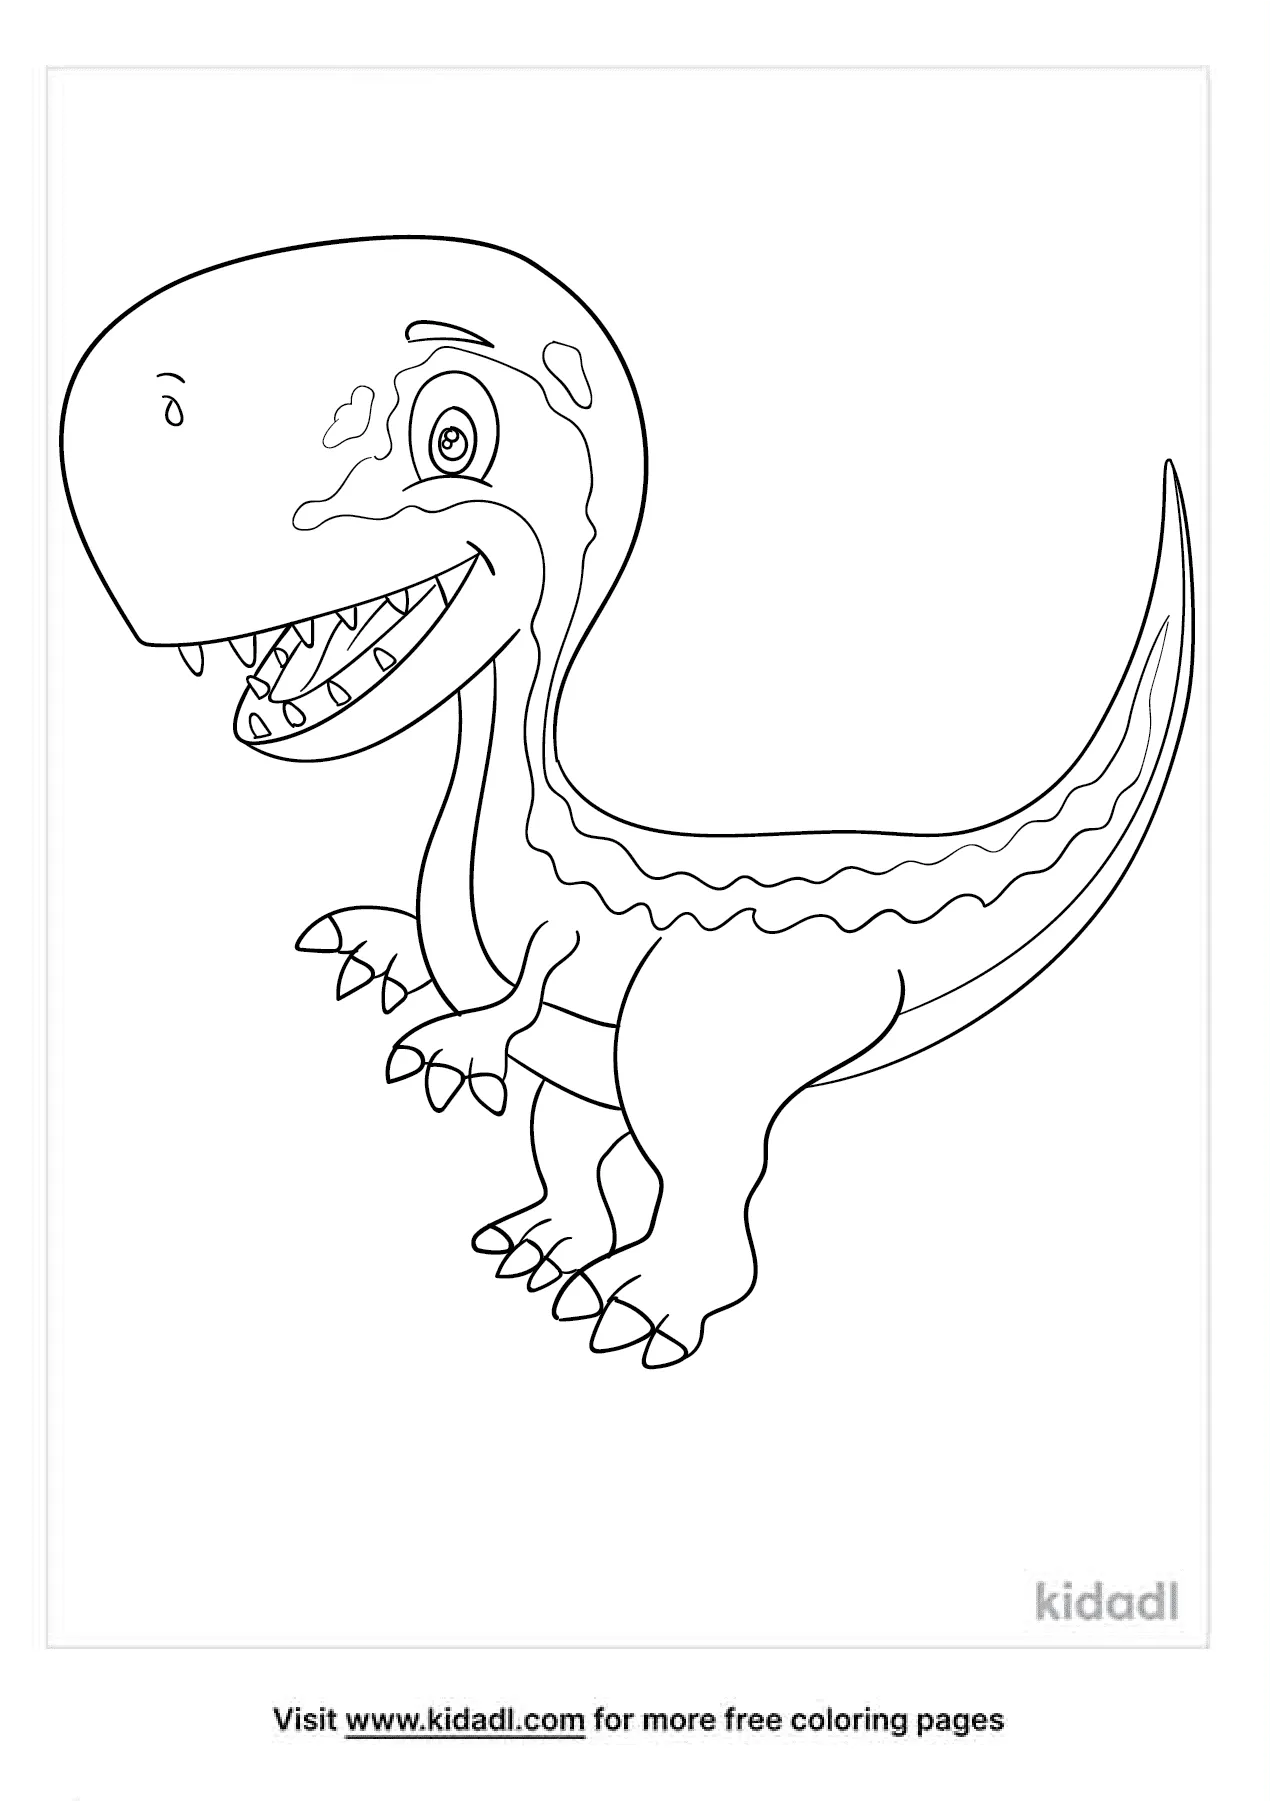 baby velociraptor coloring pages